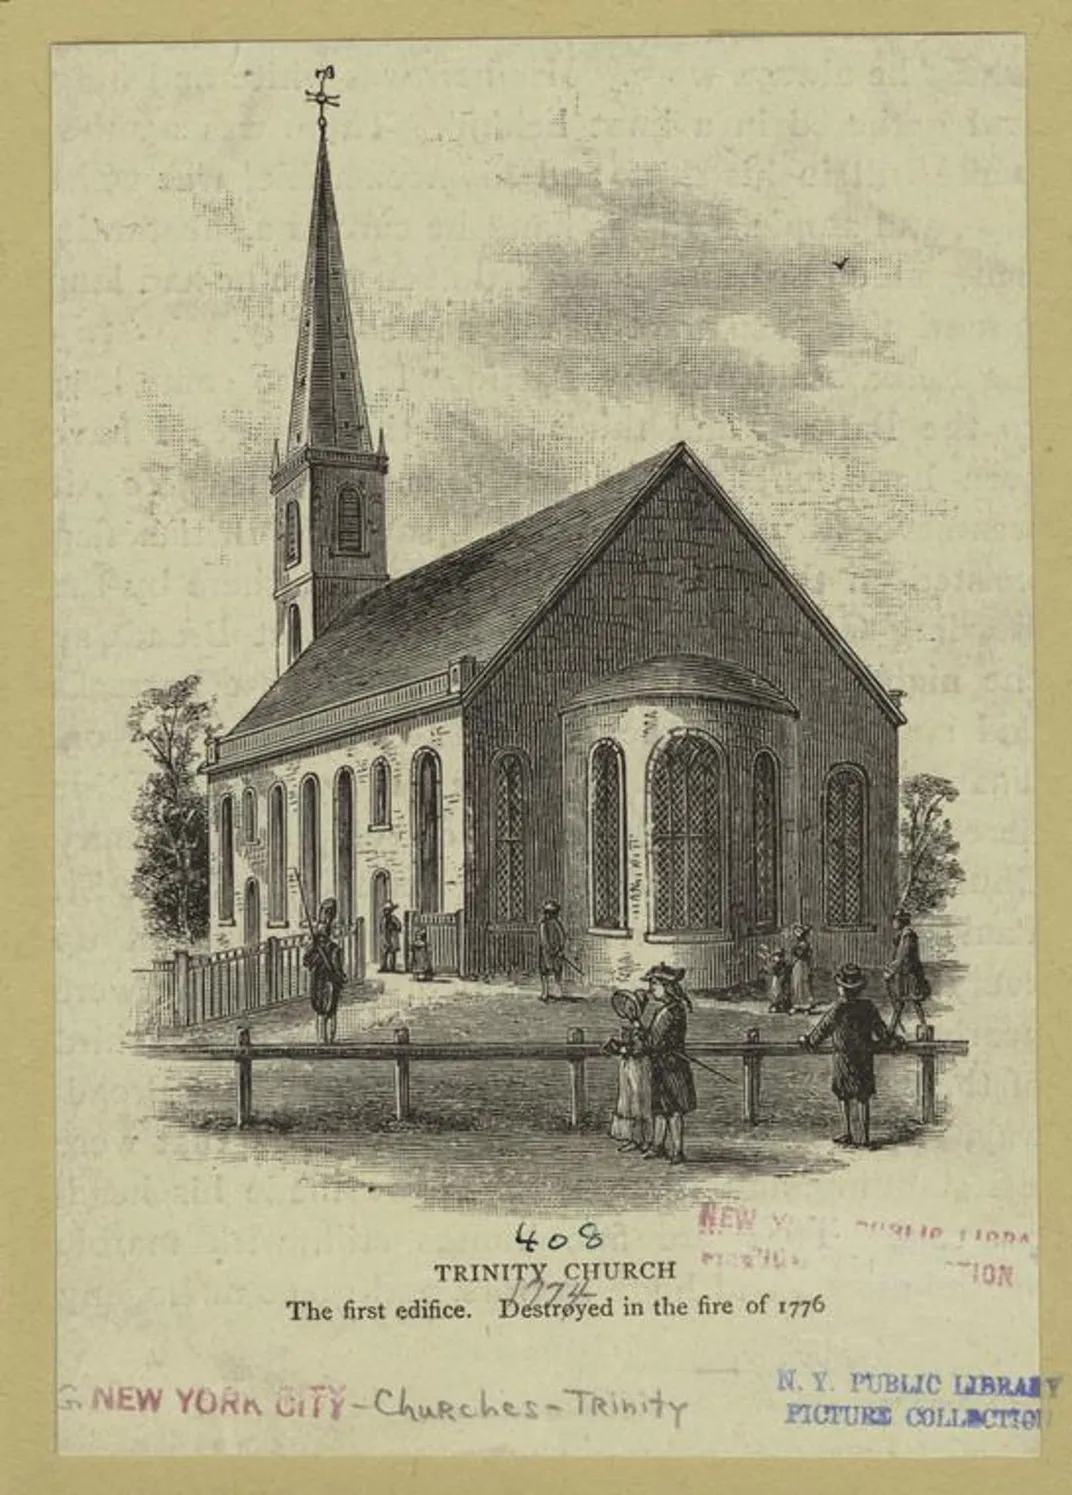 Trinity Church's exterior prior to the fire